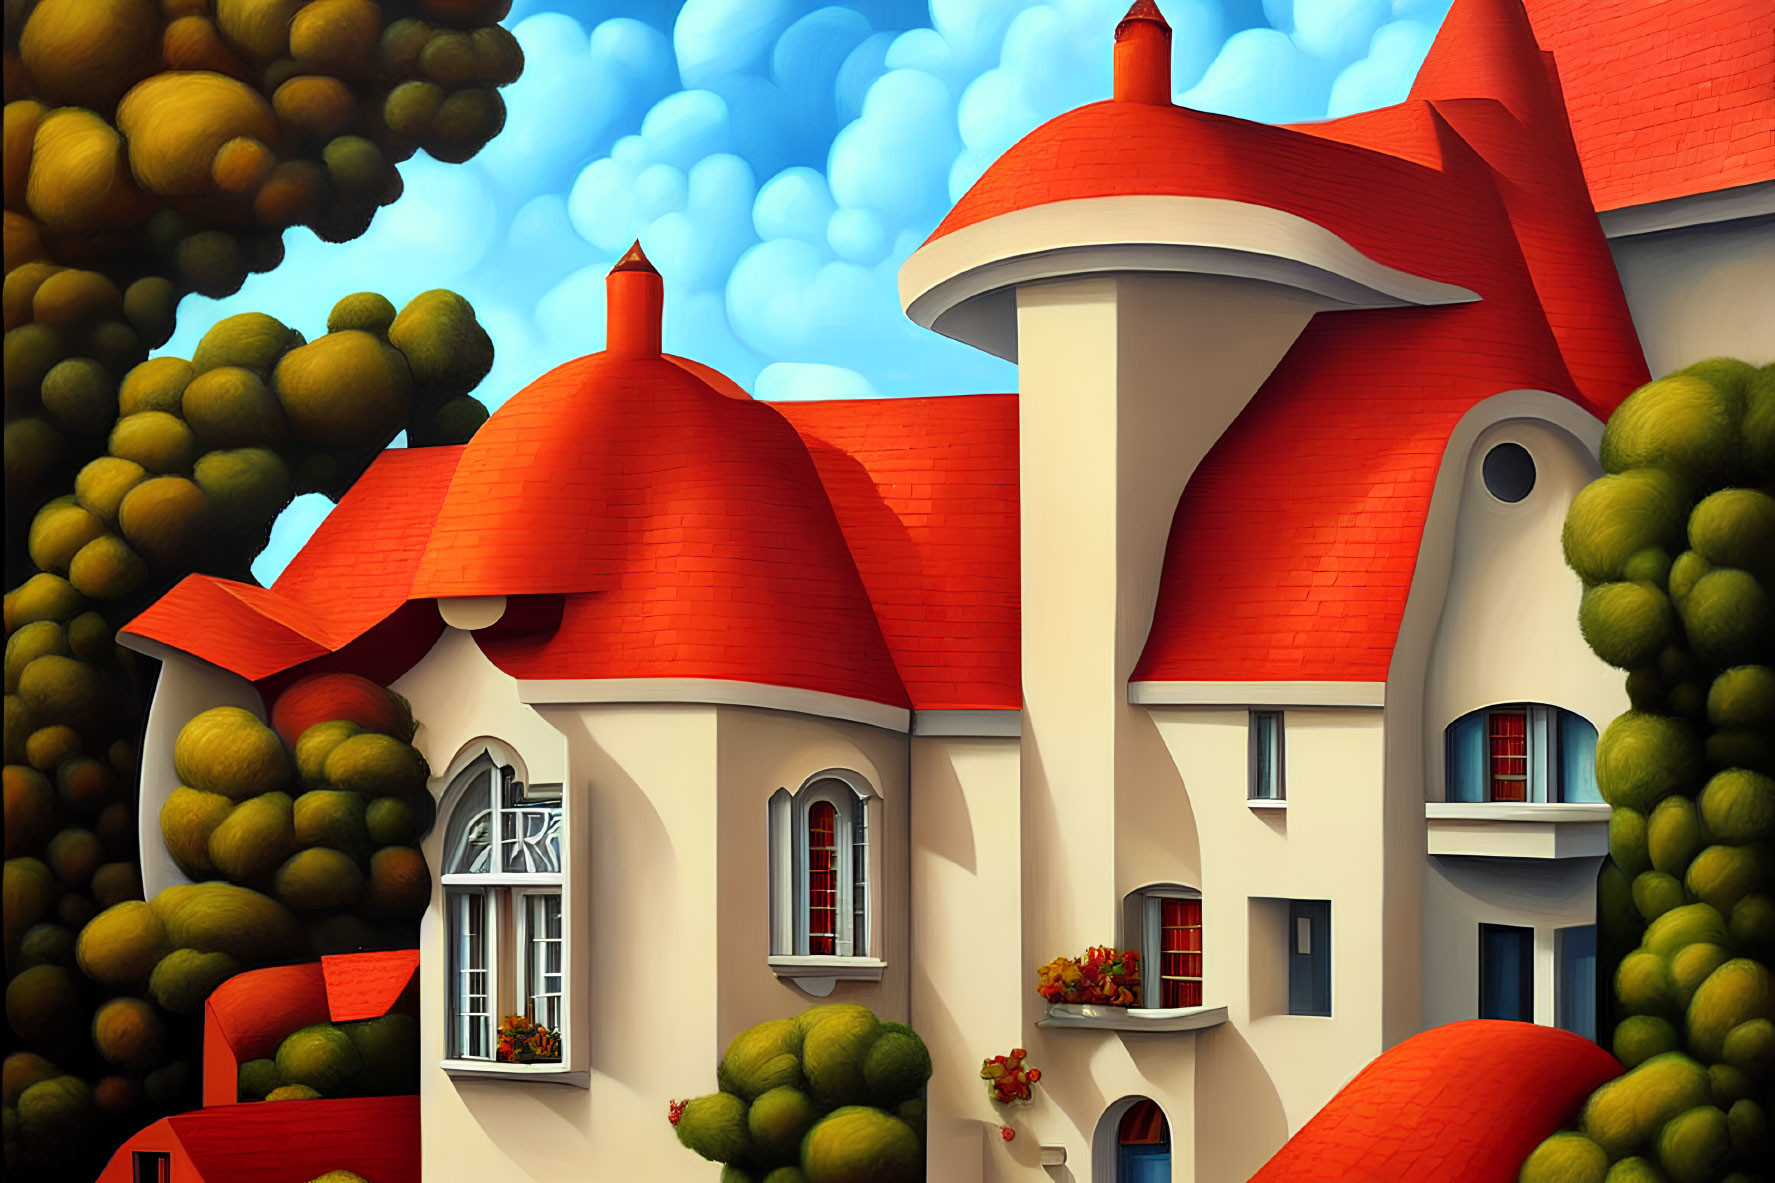 Colorful illustration of house with red roofs in nature setting